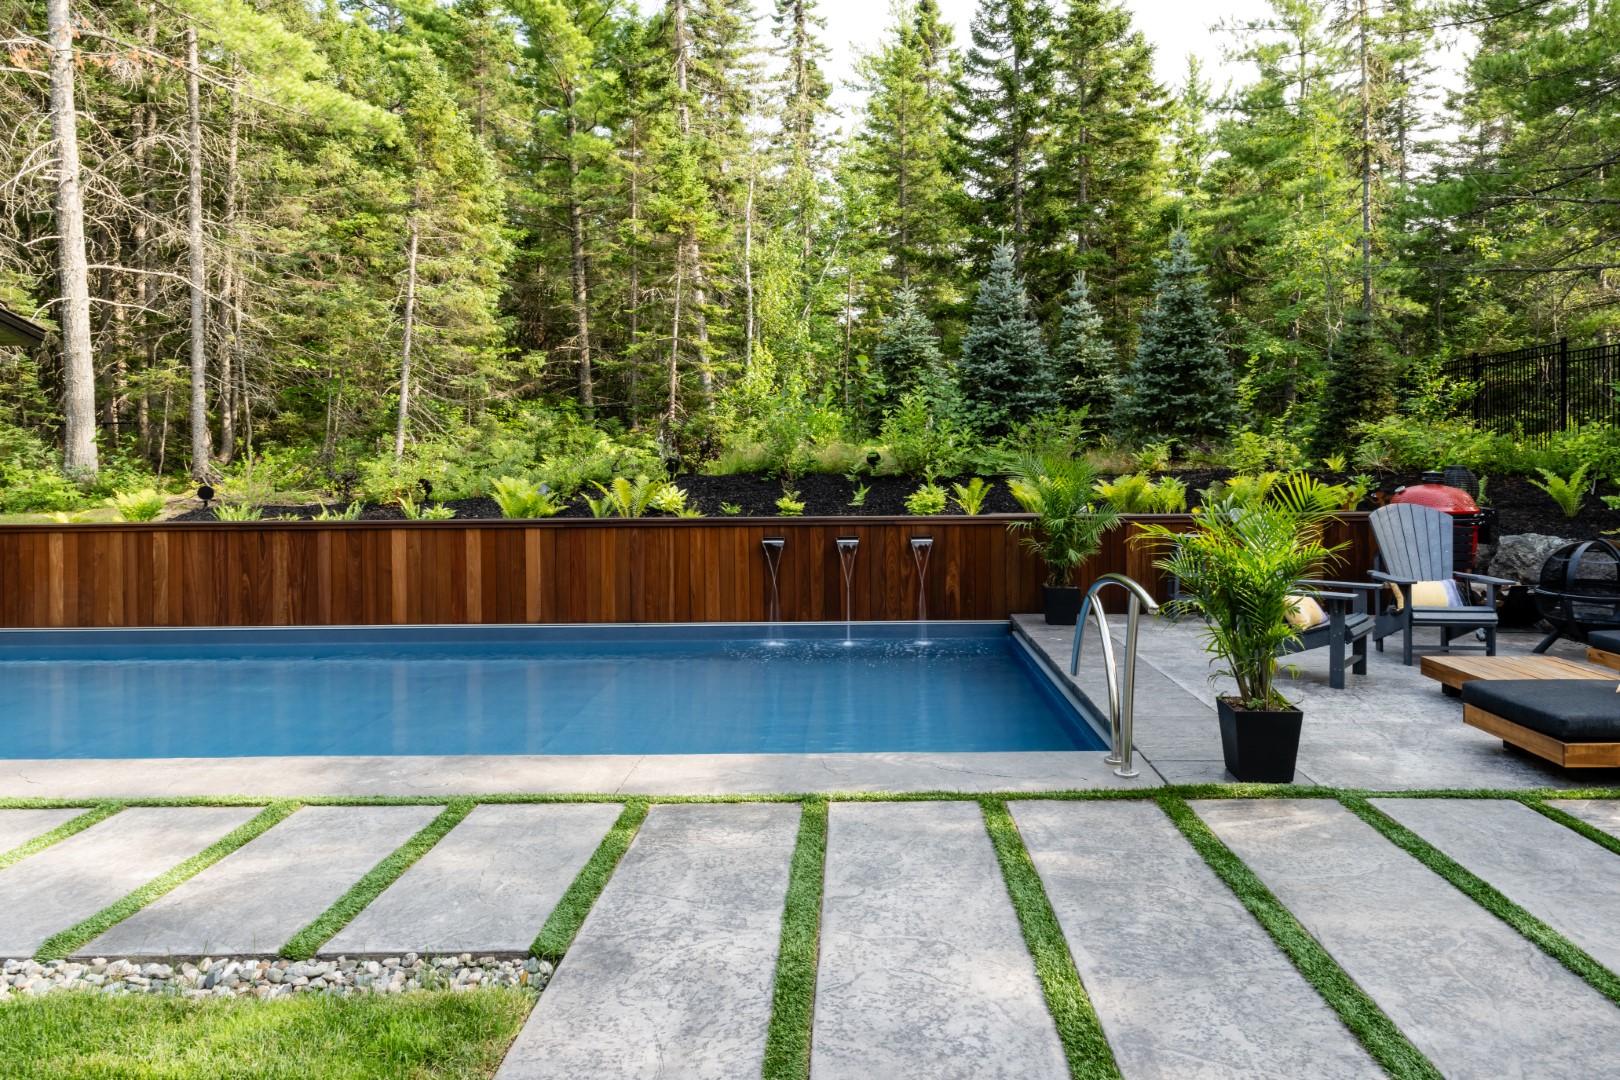 Home swimming pool with automatic cover in Lakeburn, Atlantic Canada